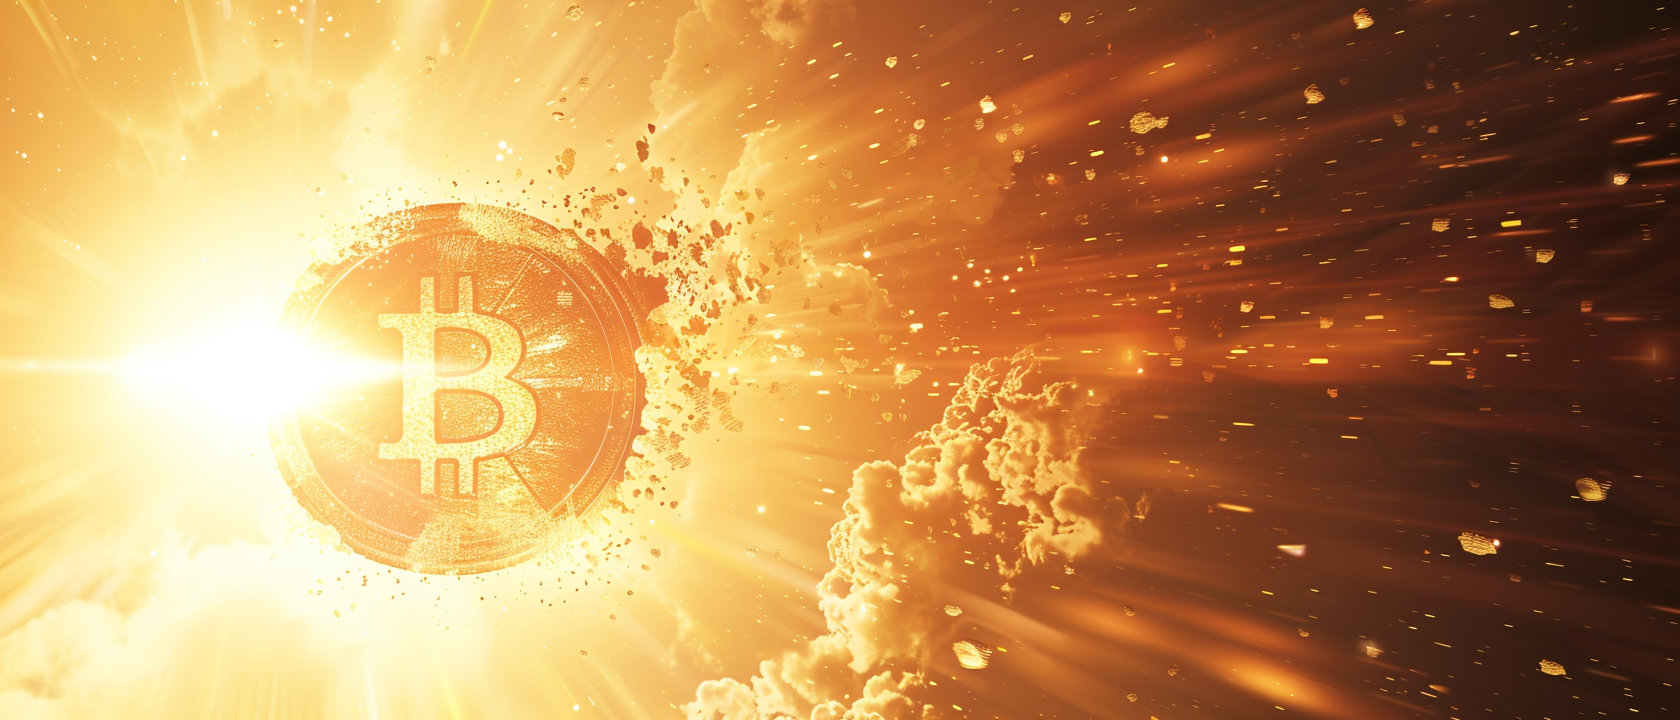 The Unstoppable Rise of Bitcoin: Expert Perspectives on Its Future